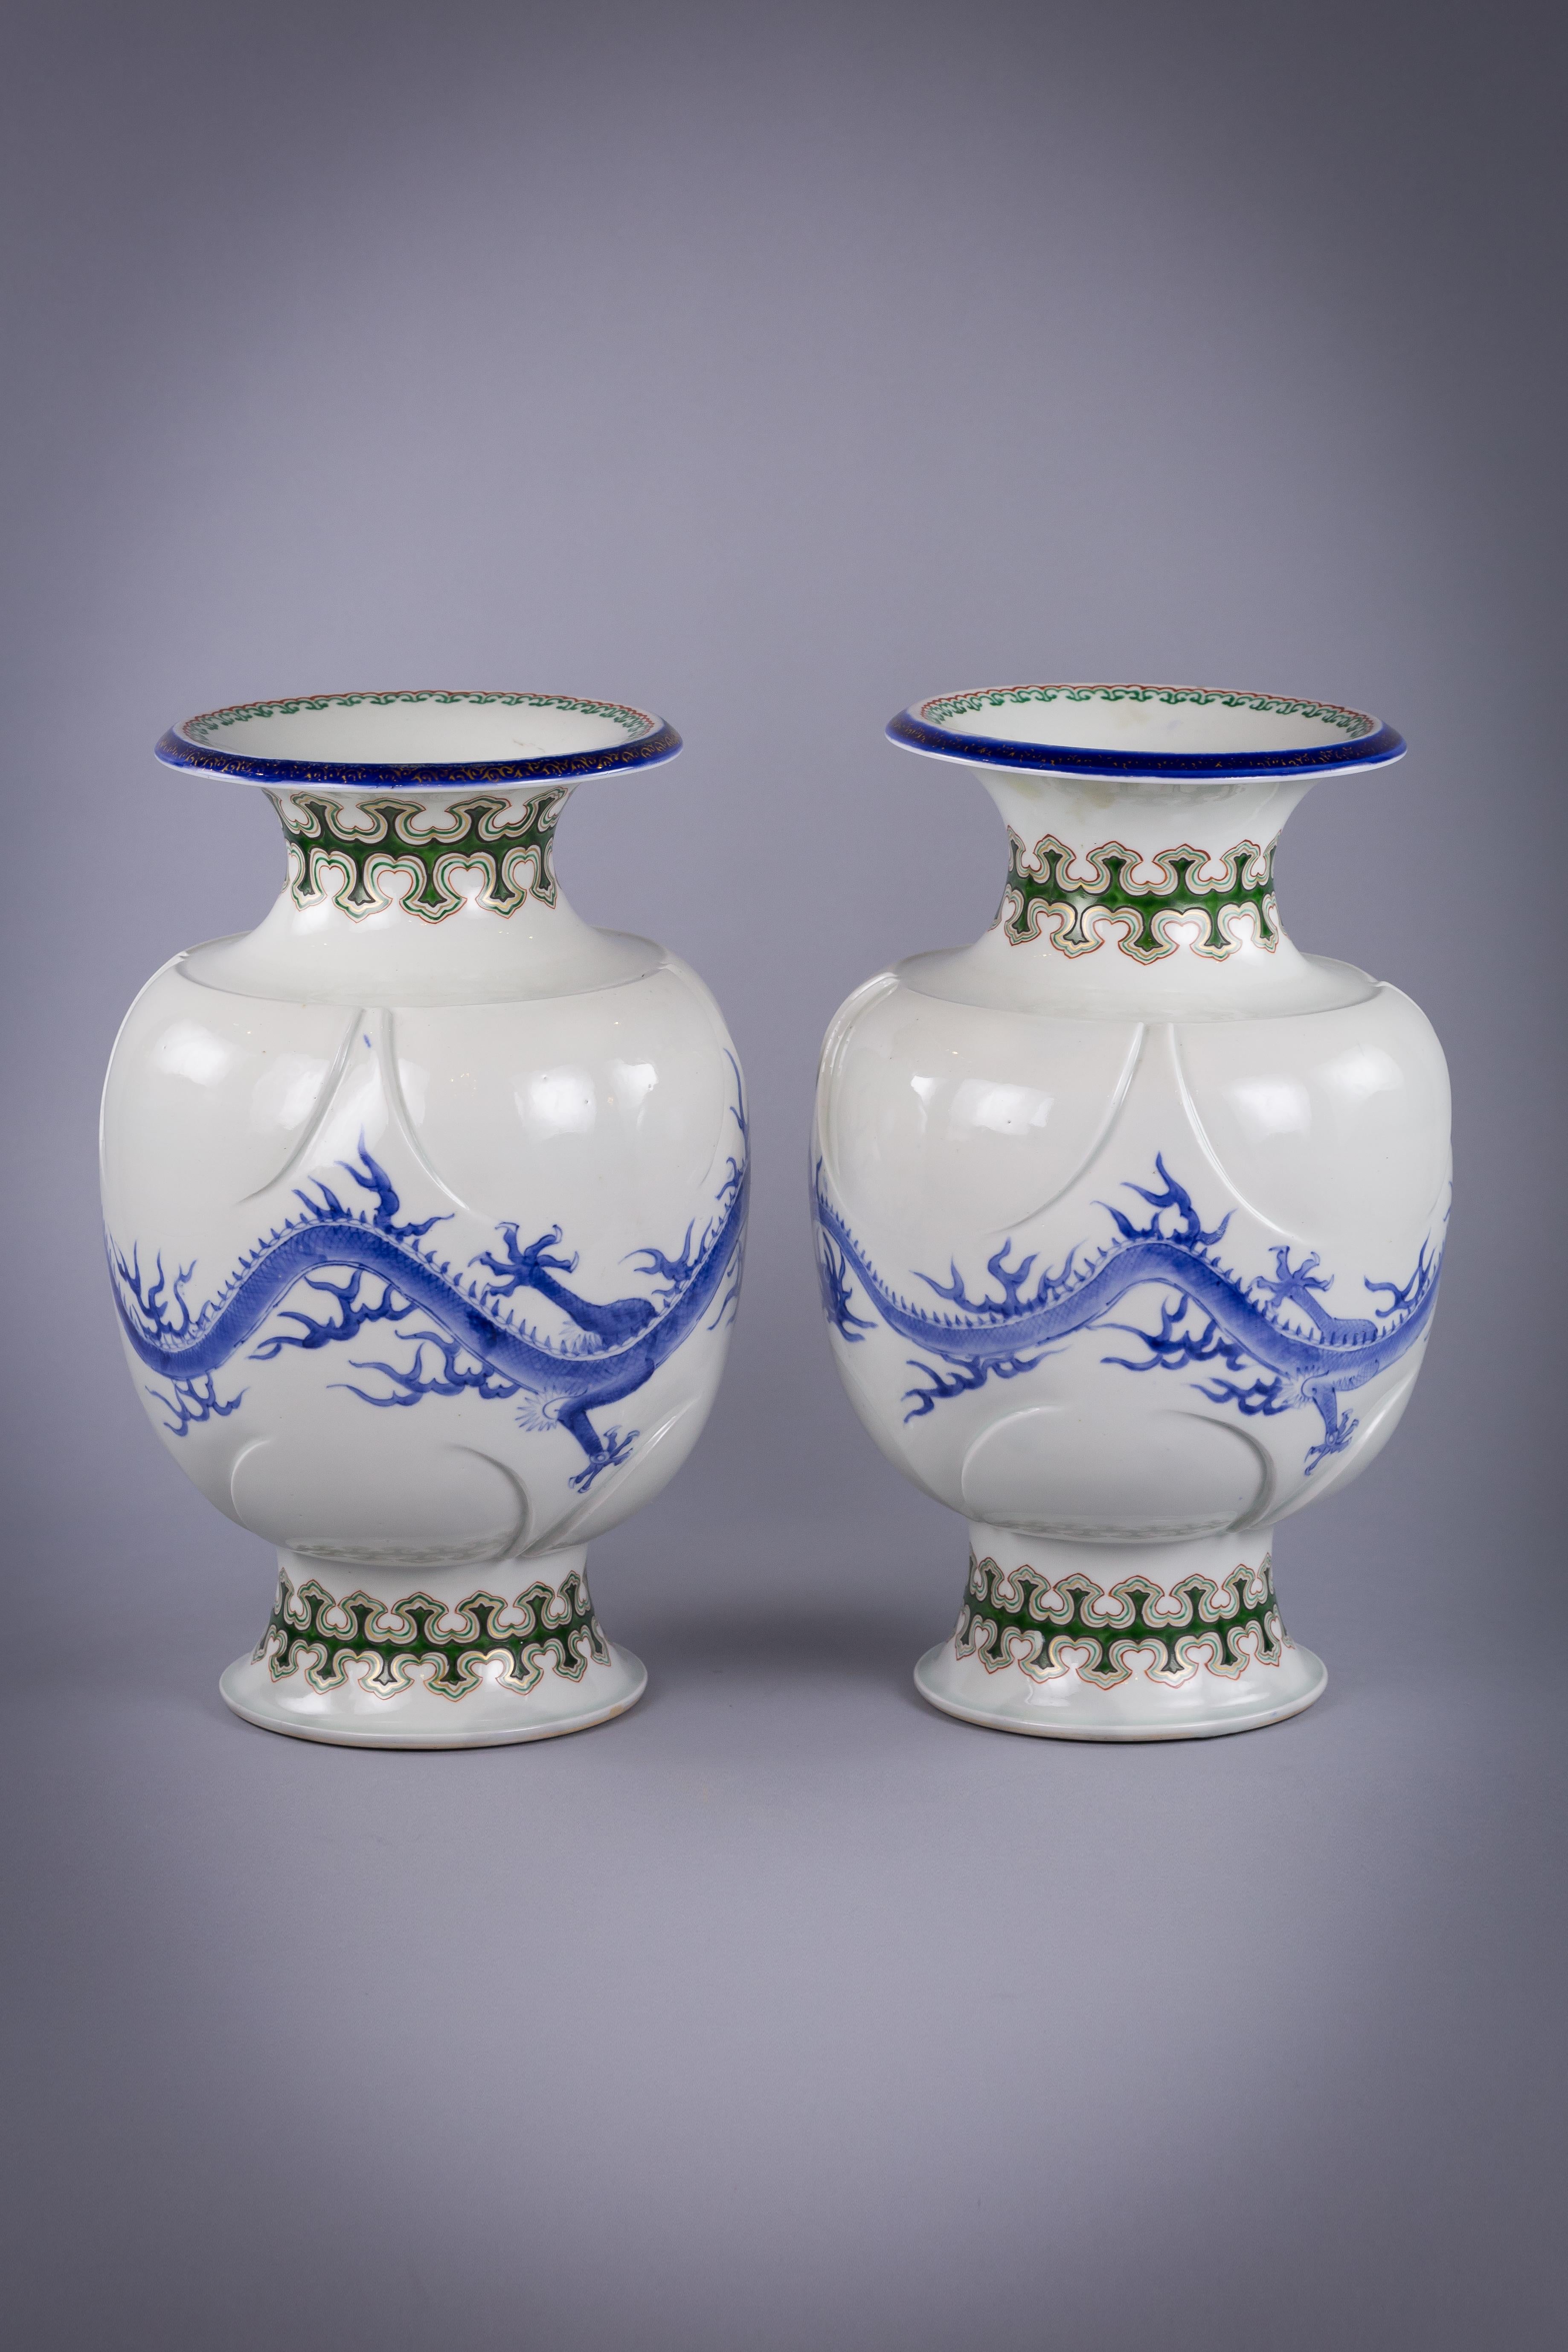 Pair of Japanese porcelain dragon vases, with molded lappets, circa 1880.